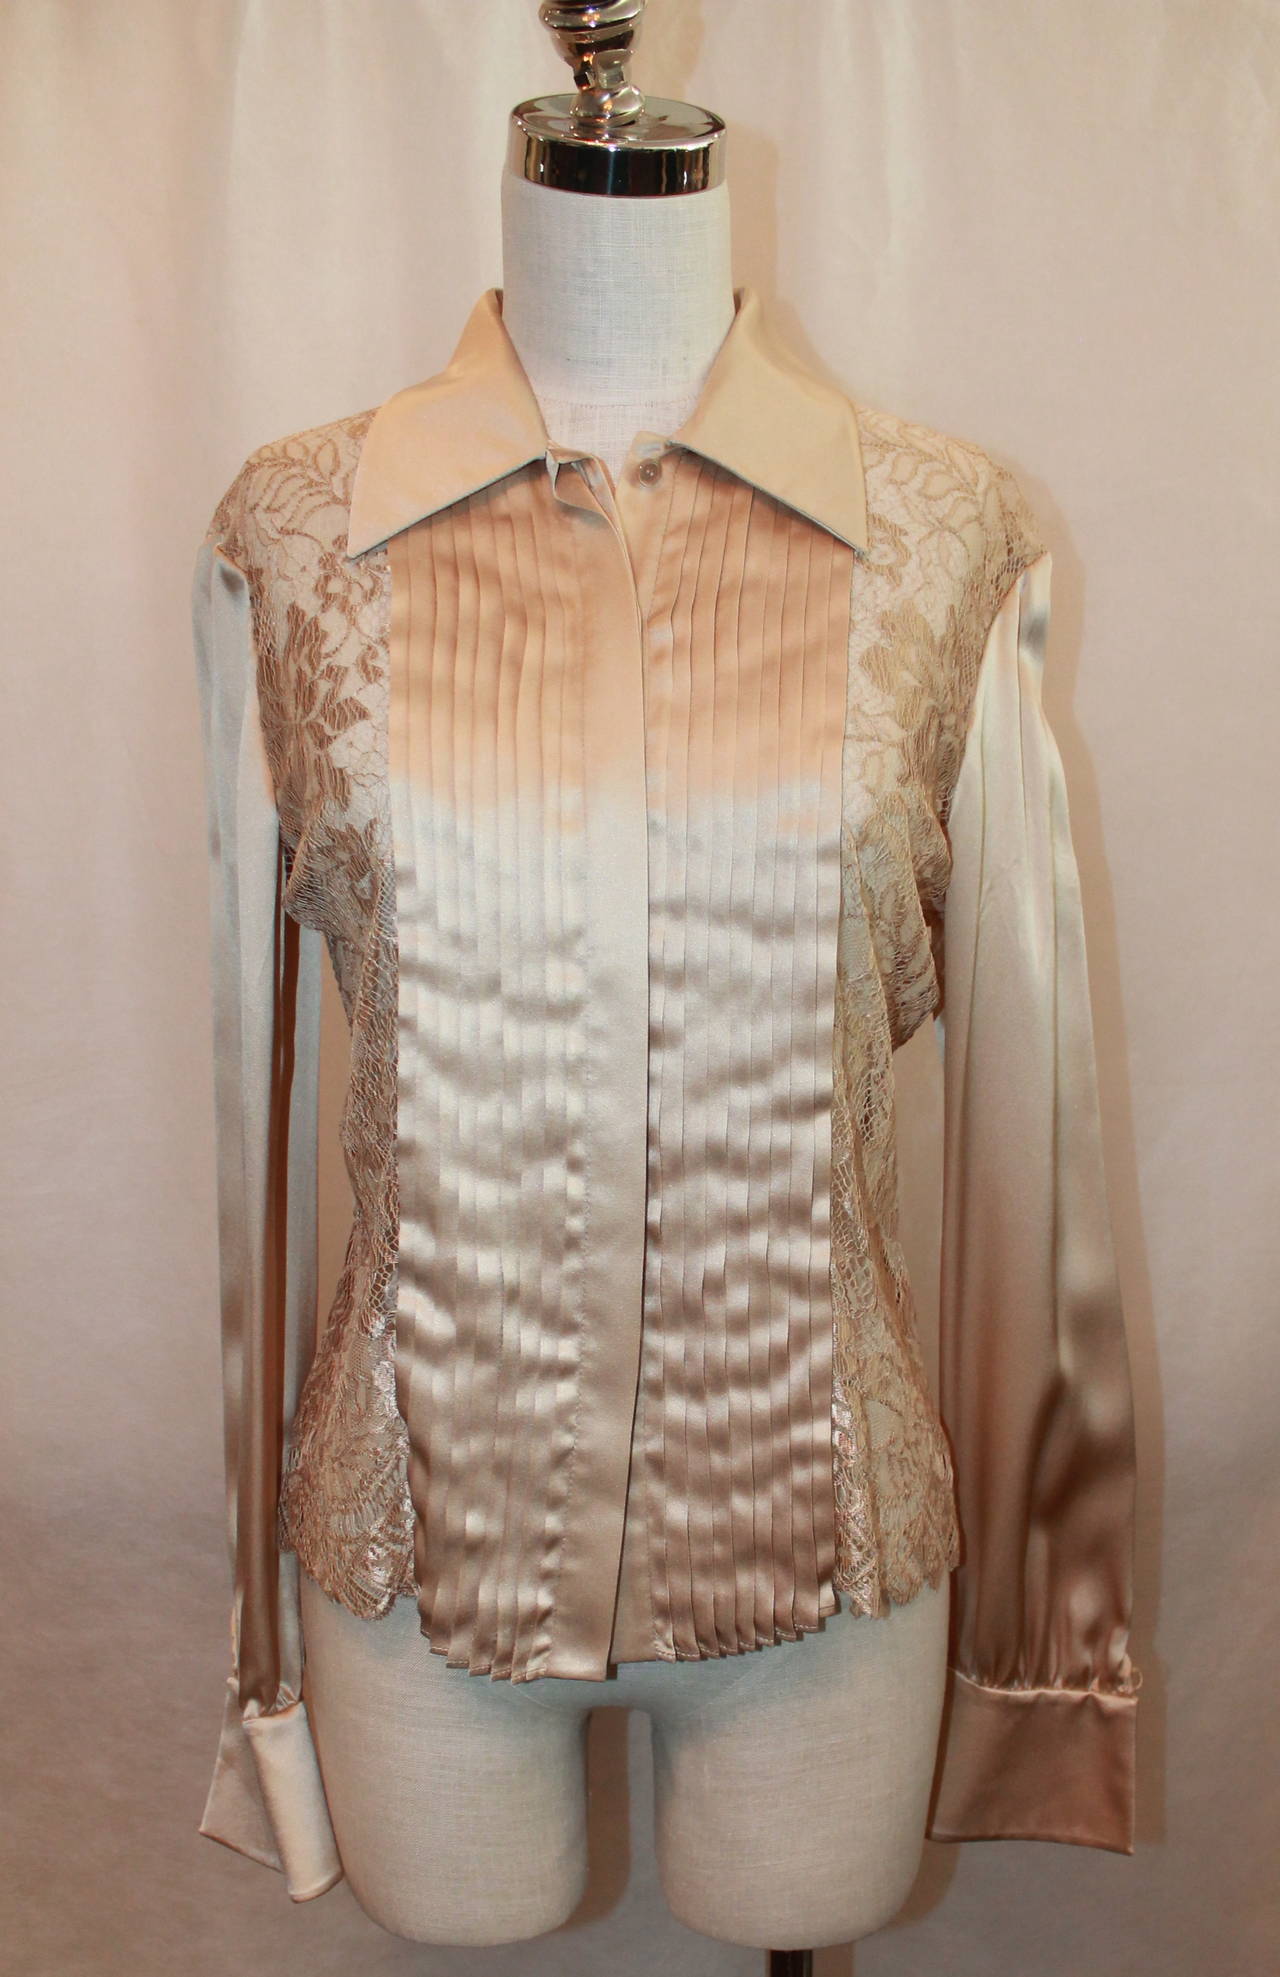 Valentino Beige Silk and Lace Long Sleeve Shirt with Front Pleating and Lace Bodice. This Size 10 Shirt is in Excellent Condition and is New With Tags. It Retails at $2275.00, as Seen on the Tags Pictured.

Measurements:
Bust: 38 